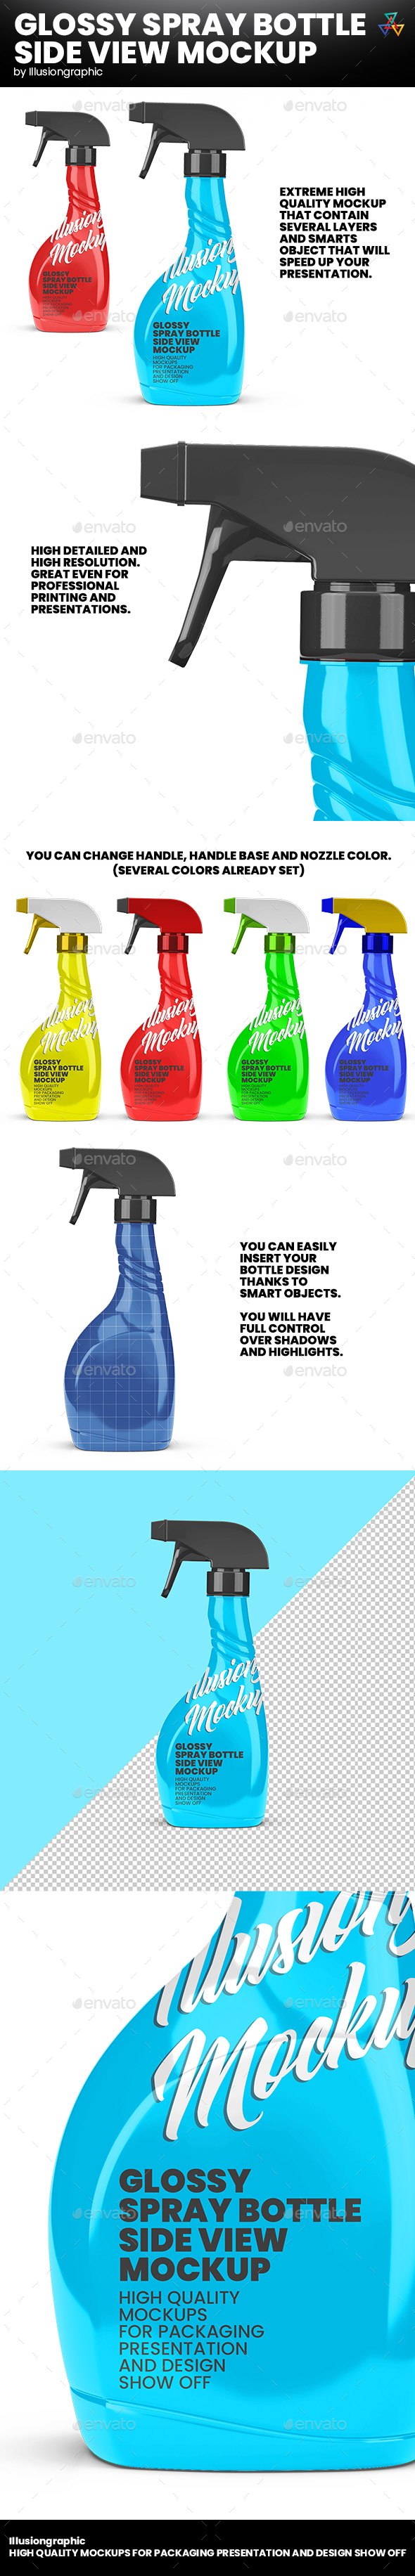 Download Glossy Spray Bottle Side View Mockup By Illusiongraphic Graphicriver